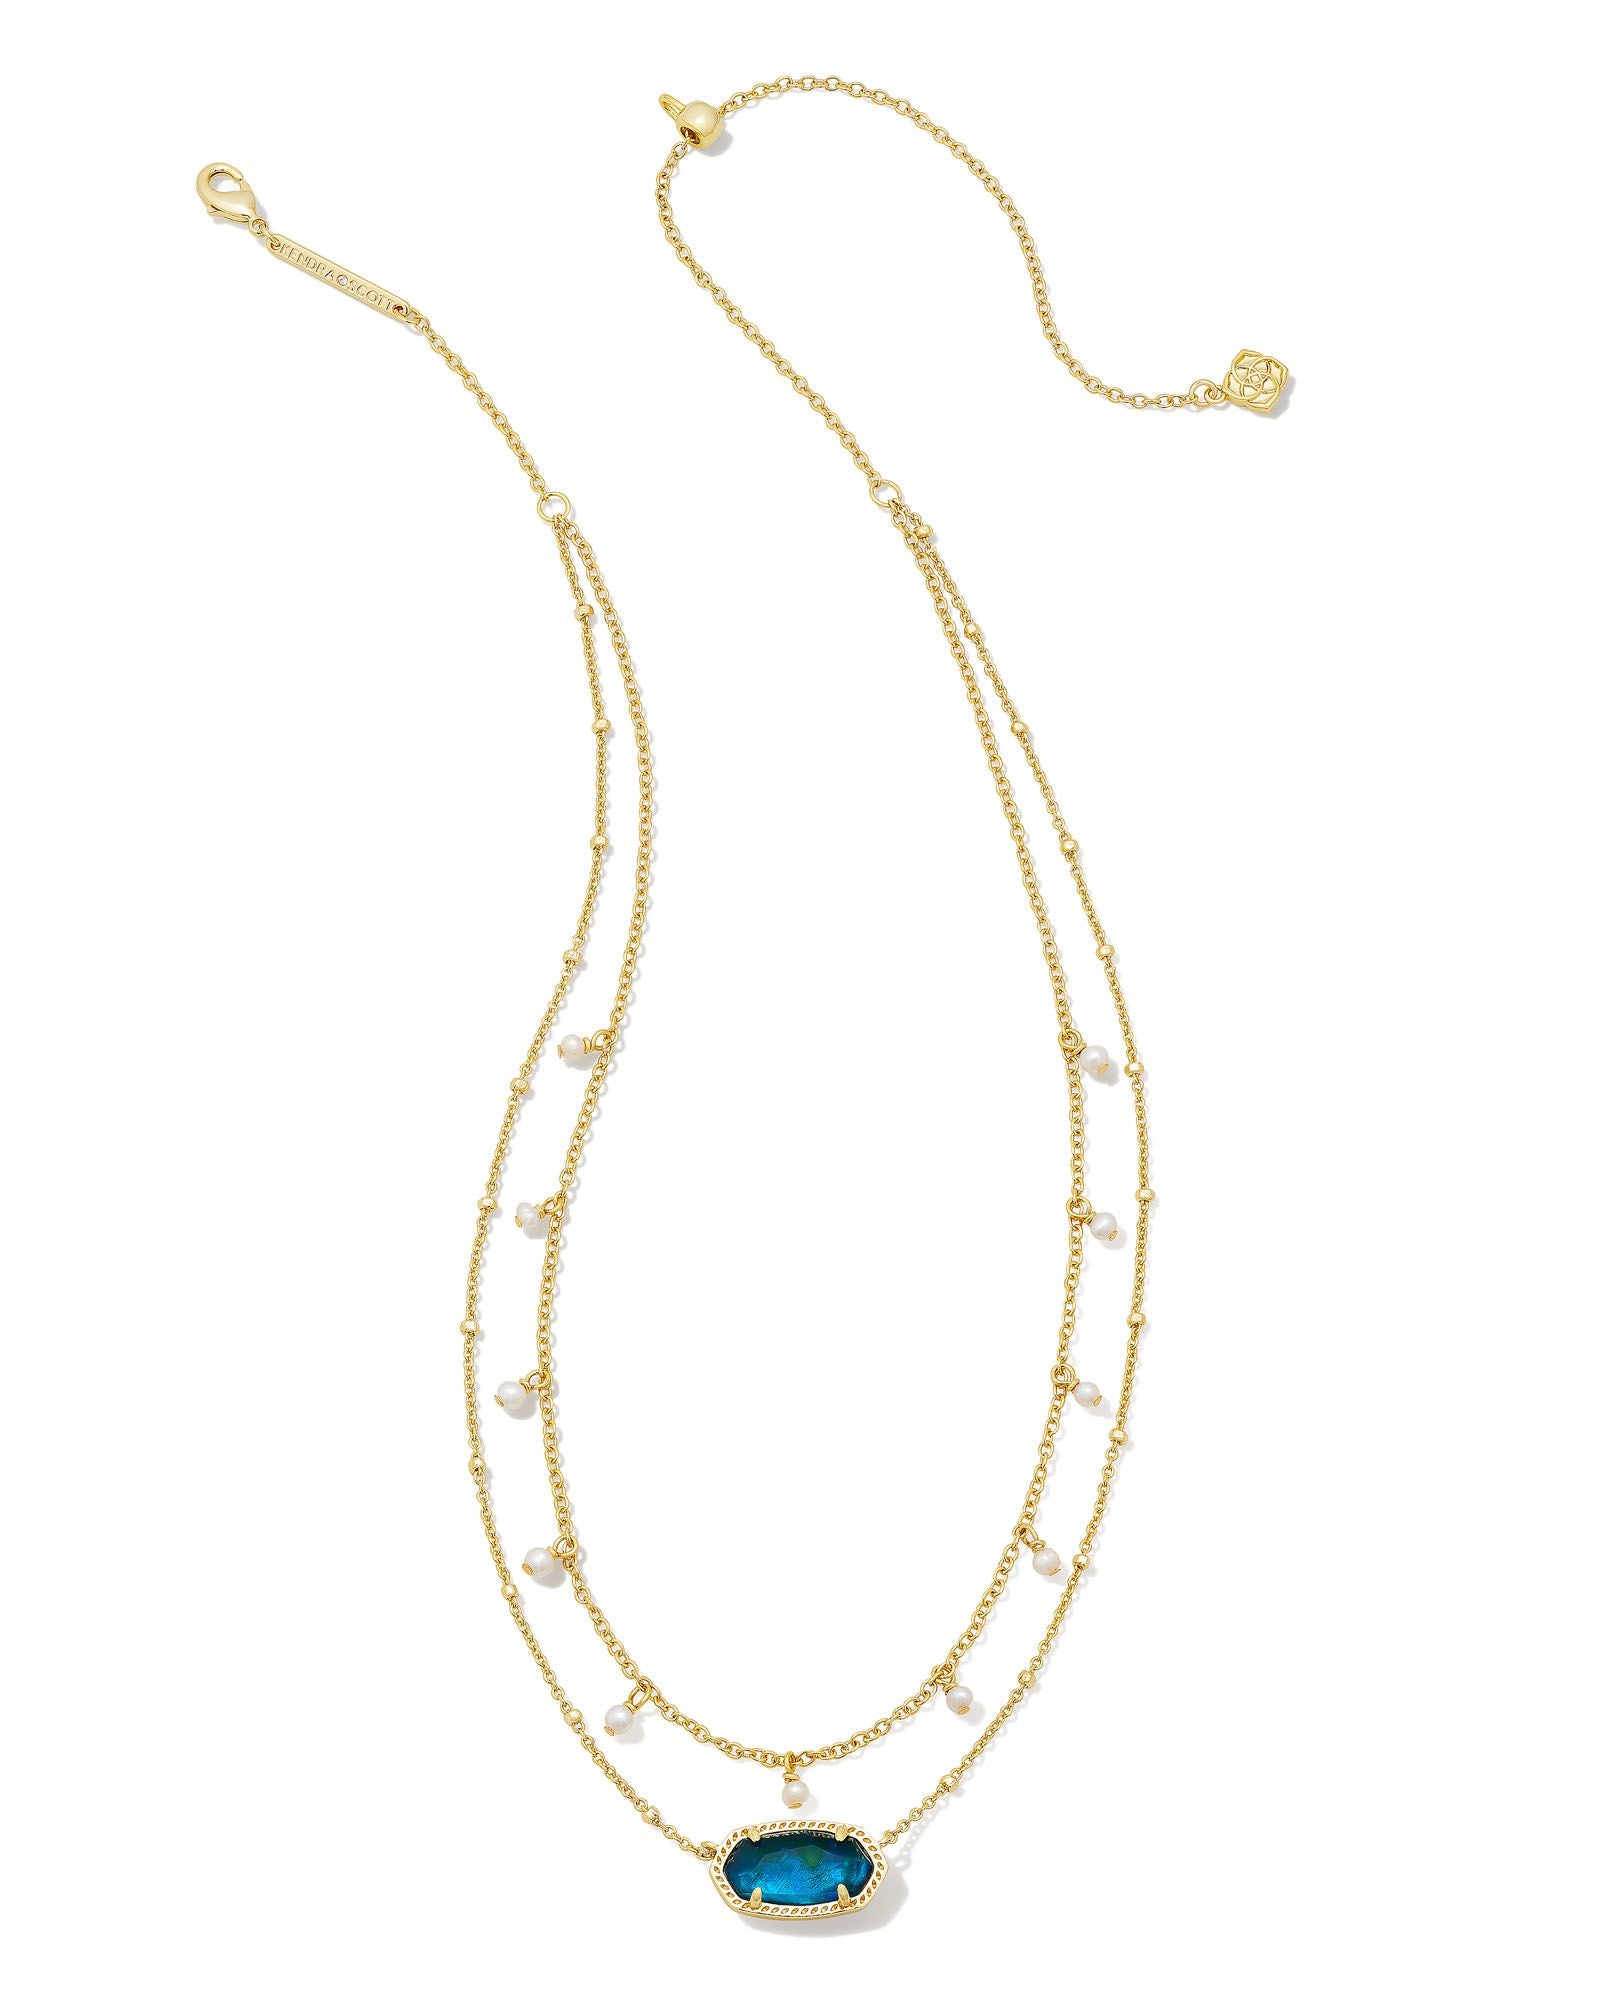 Elisa Pearl Multi Strand Necklace in Gold Teal Abalone